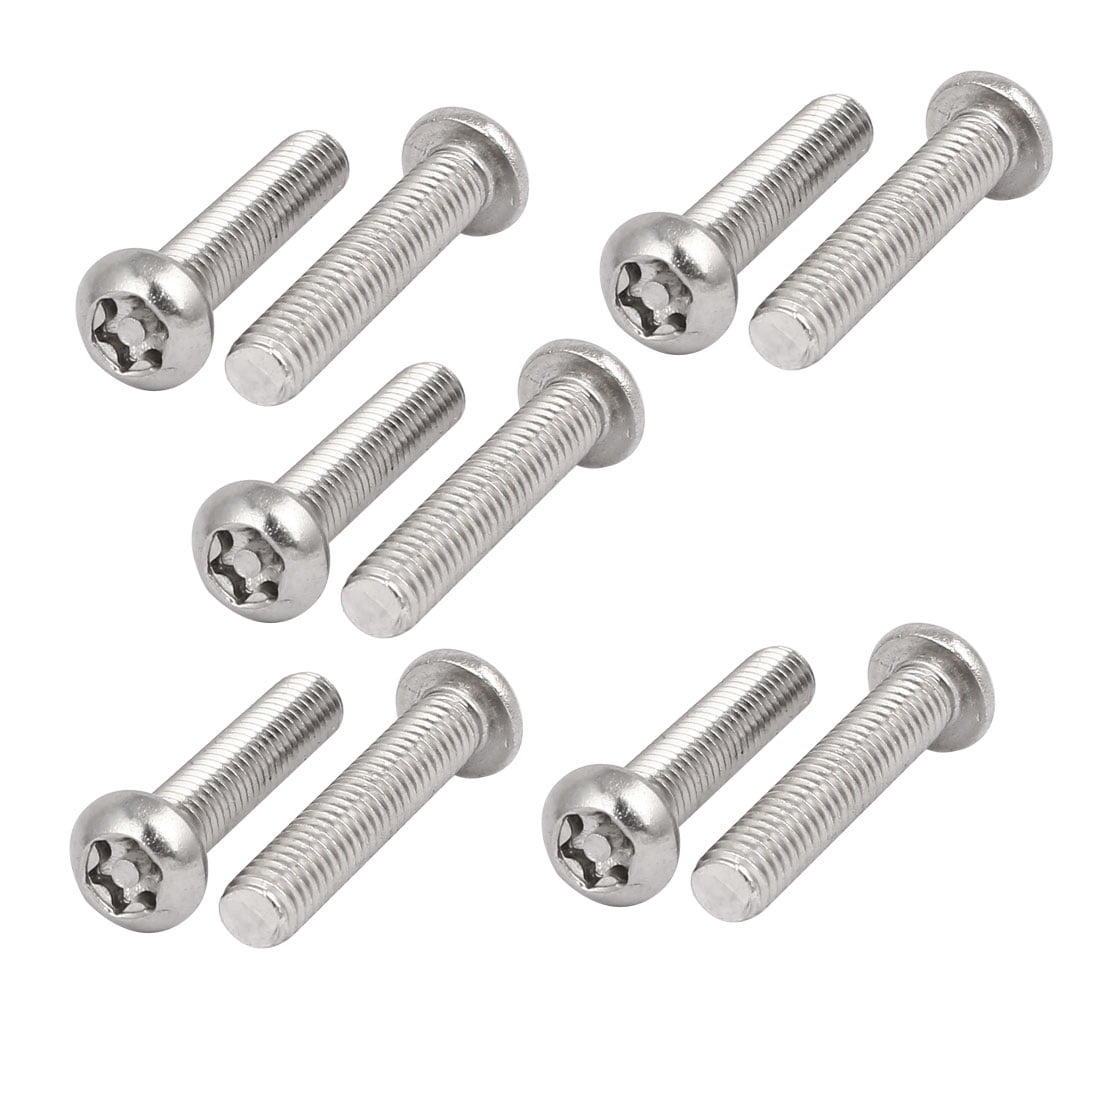 Qty 10 Button Post Torx M6 x 10mm Stainless T30 Security Screw Tamperproof 304 